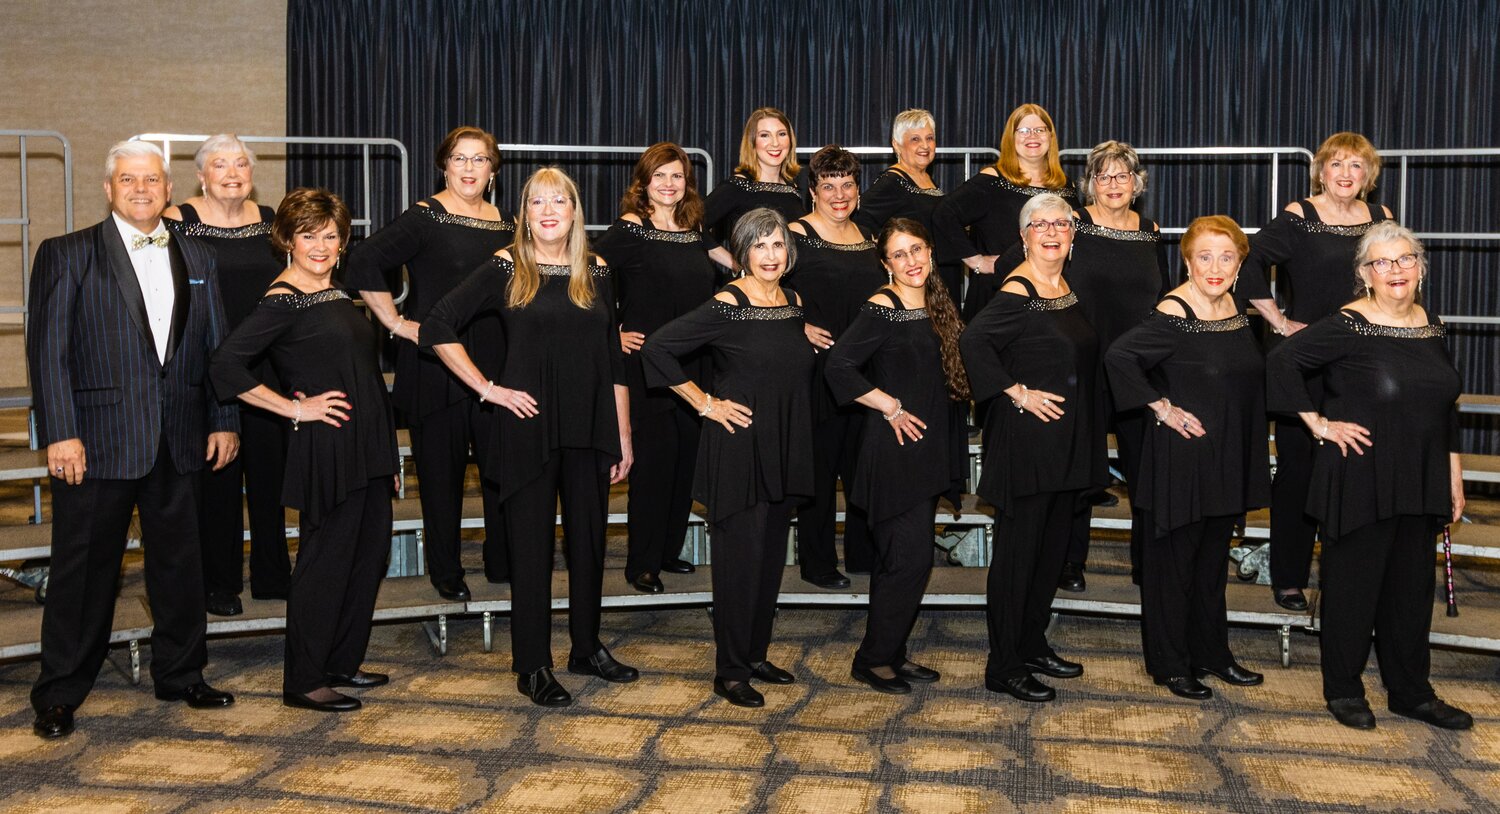 Harmony Heritage women’s a cappella chorus holds open rehearsals on Tuesday nights at 7:00 pm at St. Paul’s Episcopal Church in Pawtucket.